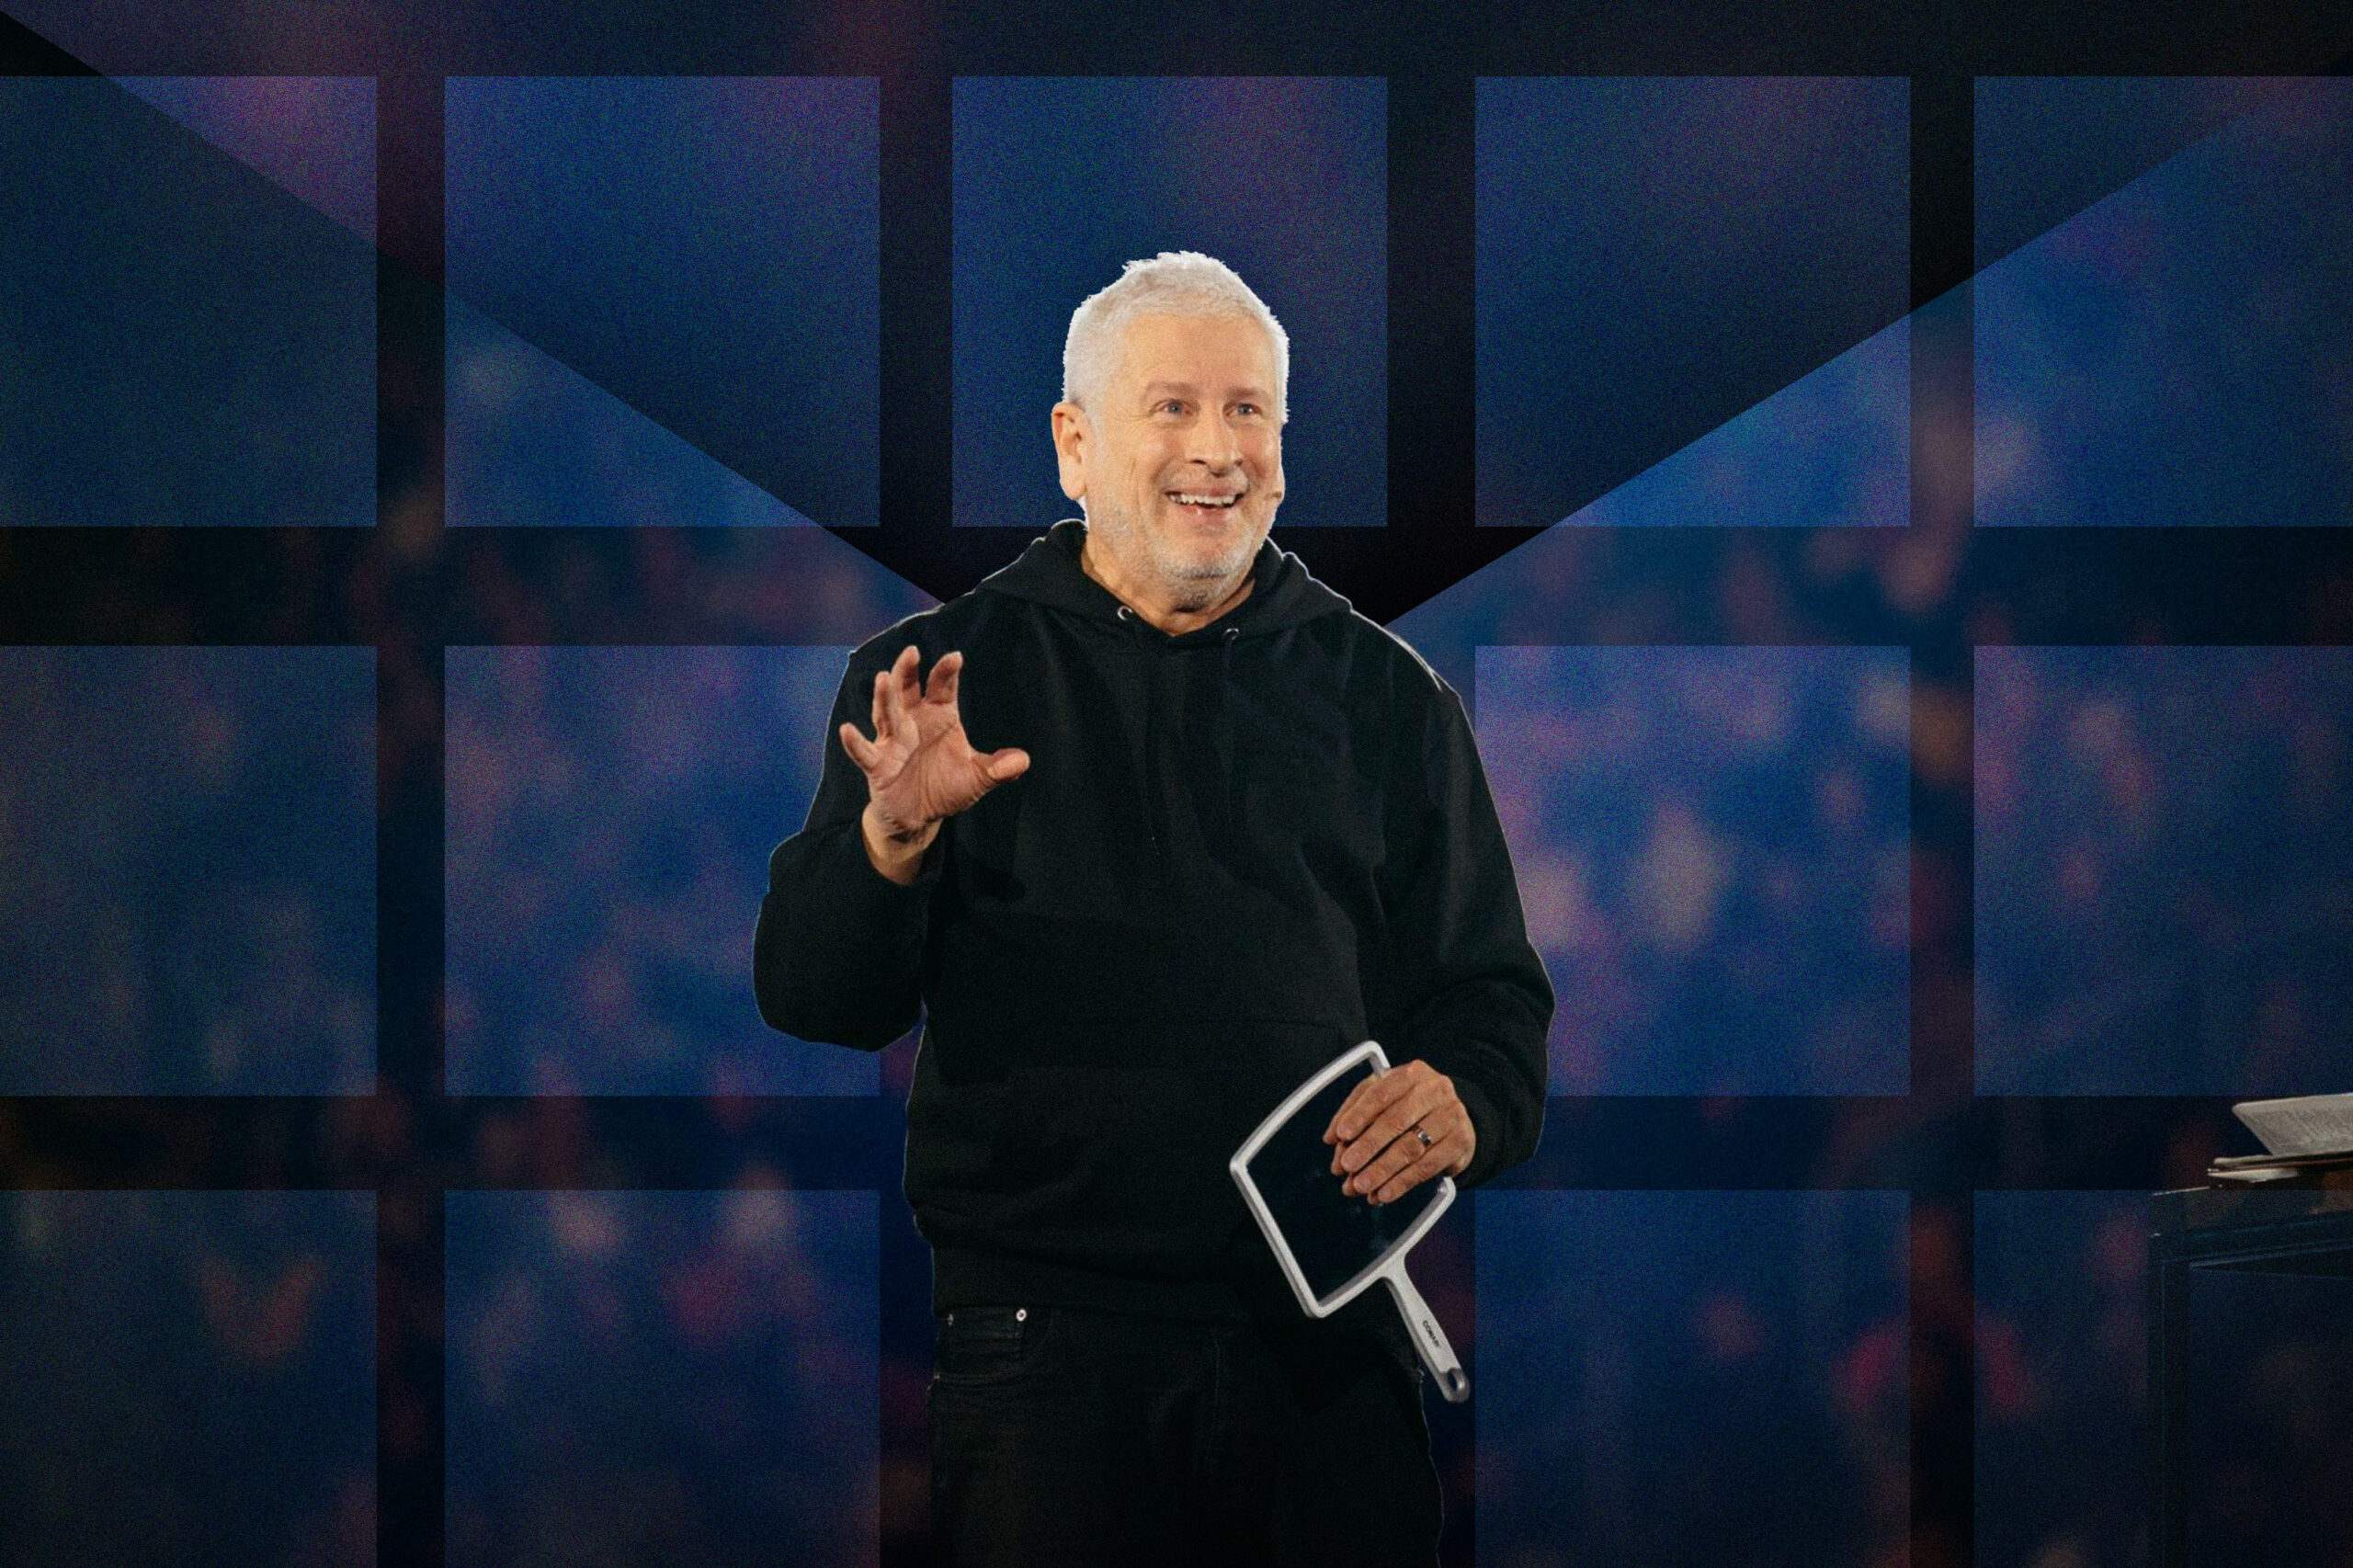 Louie Giglio on How to Take Every Thought Captive - RELEVANT